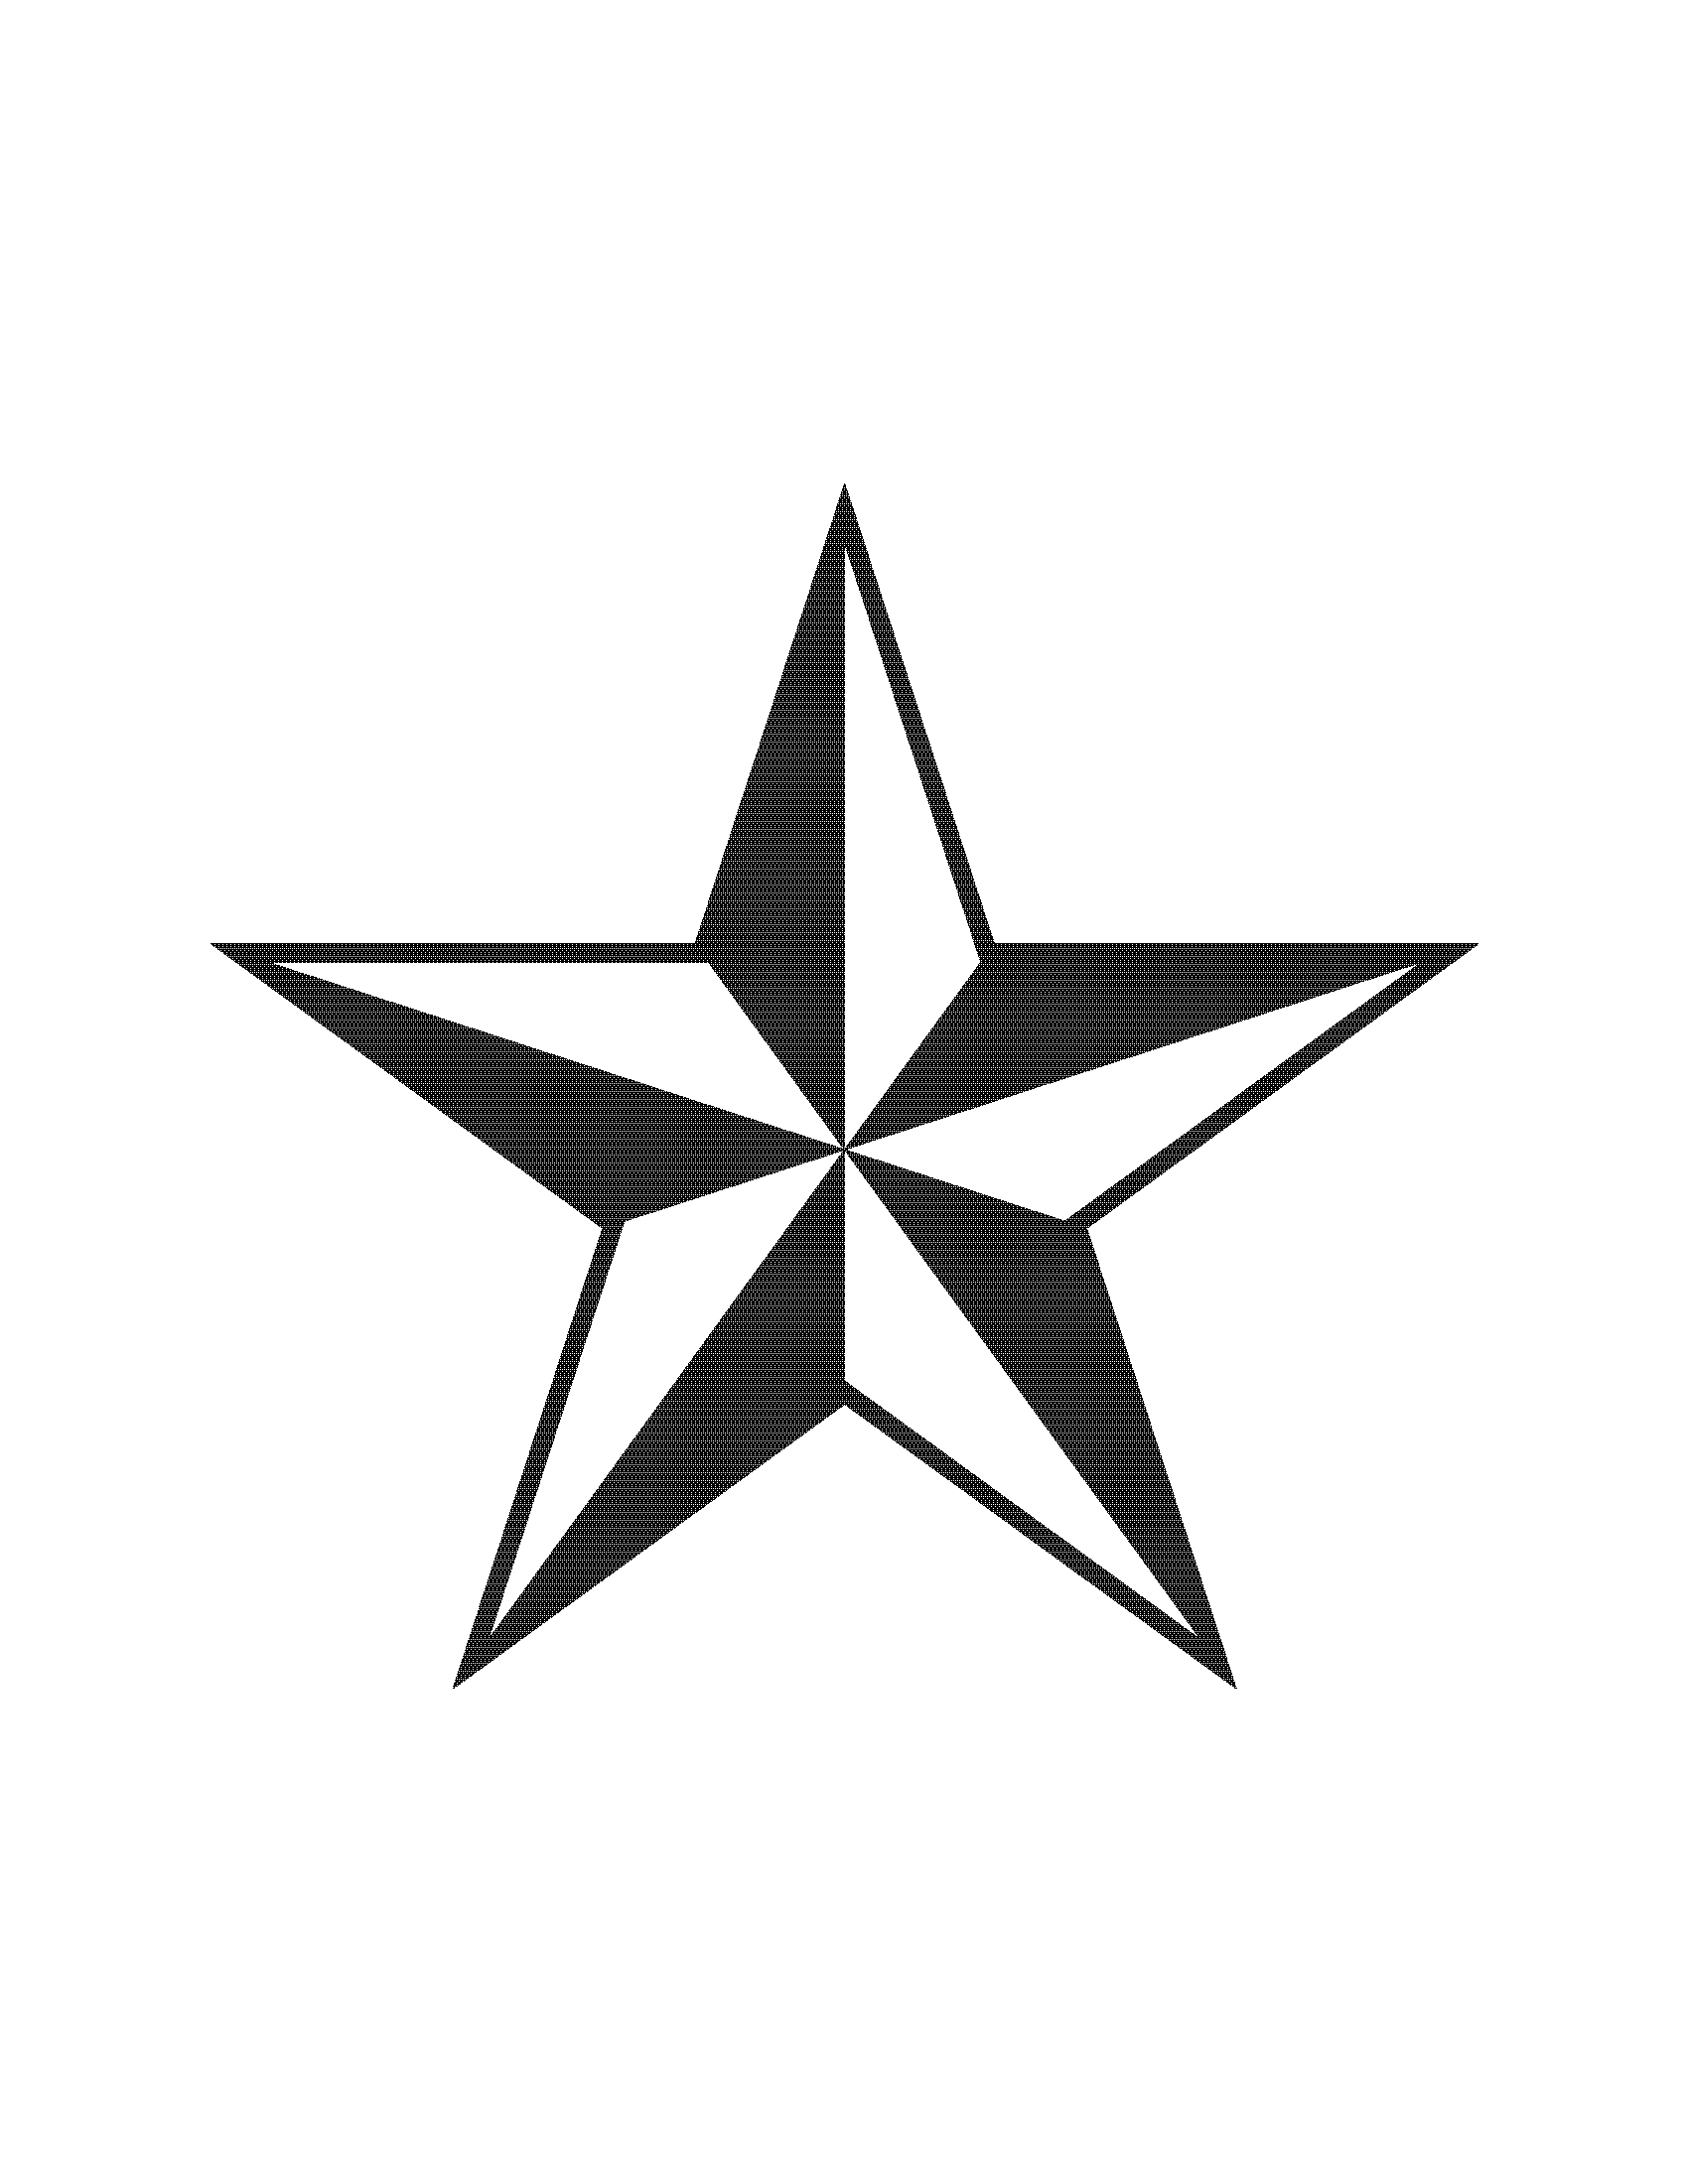 White Star Image | Free Download Clip Art | Free Clip Art | on ...